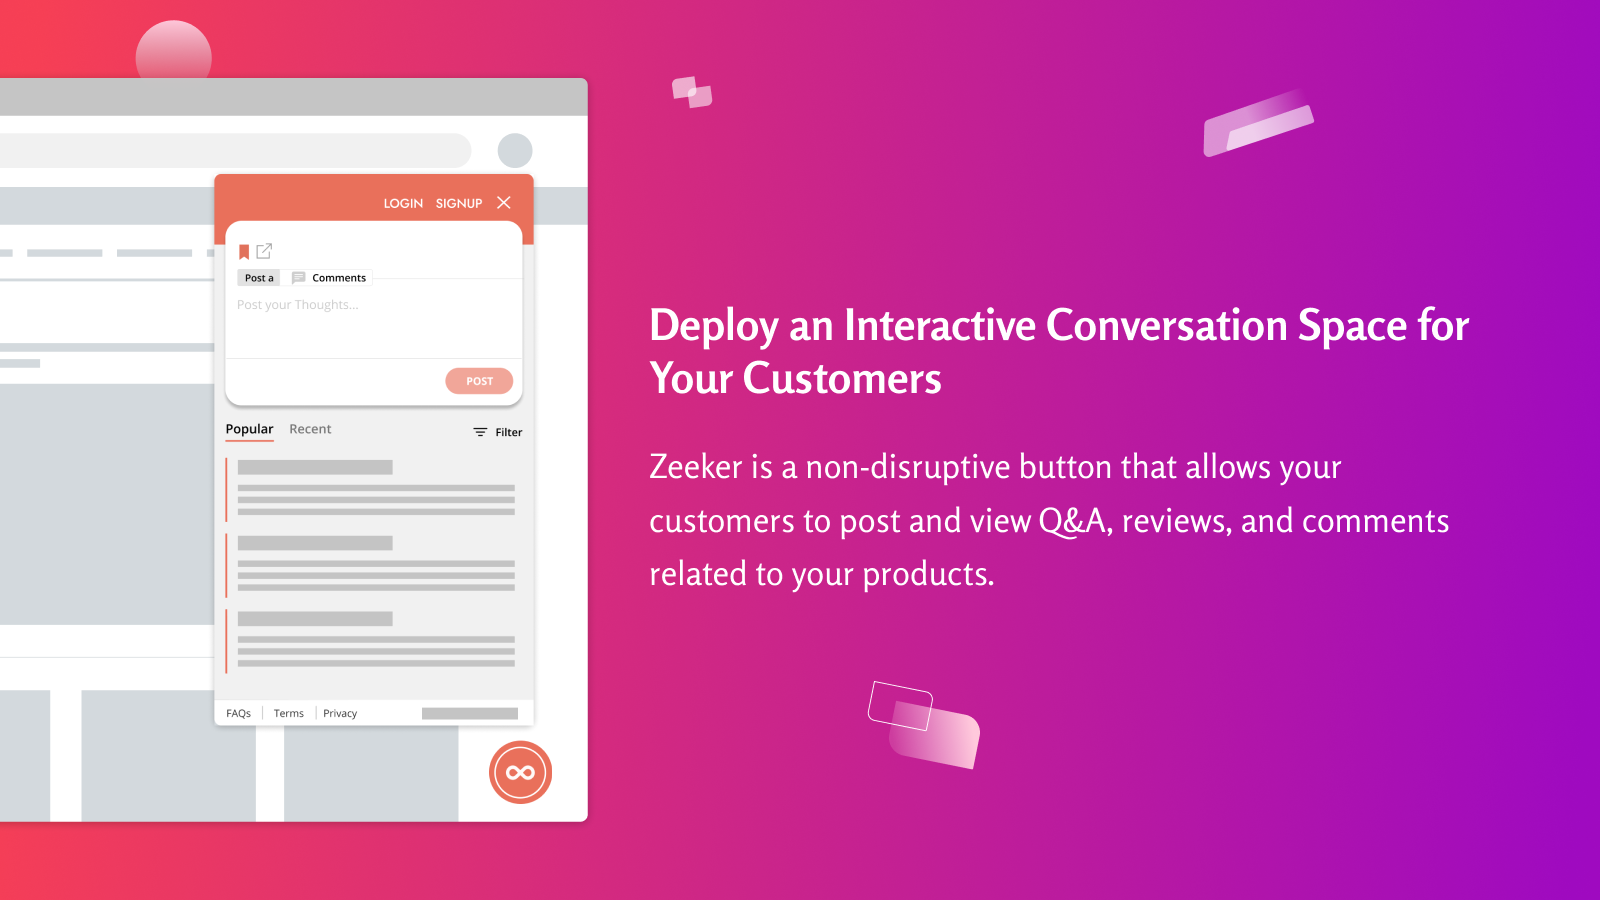 Your store visitors can discuss your products with Zeeker